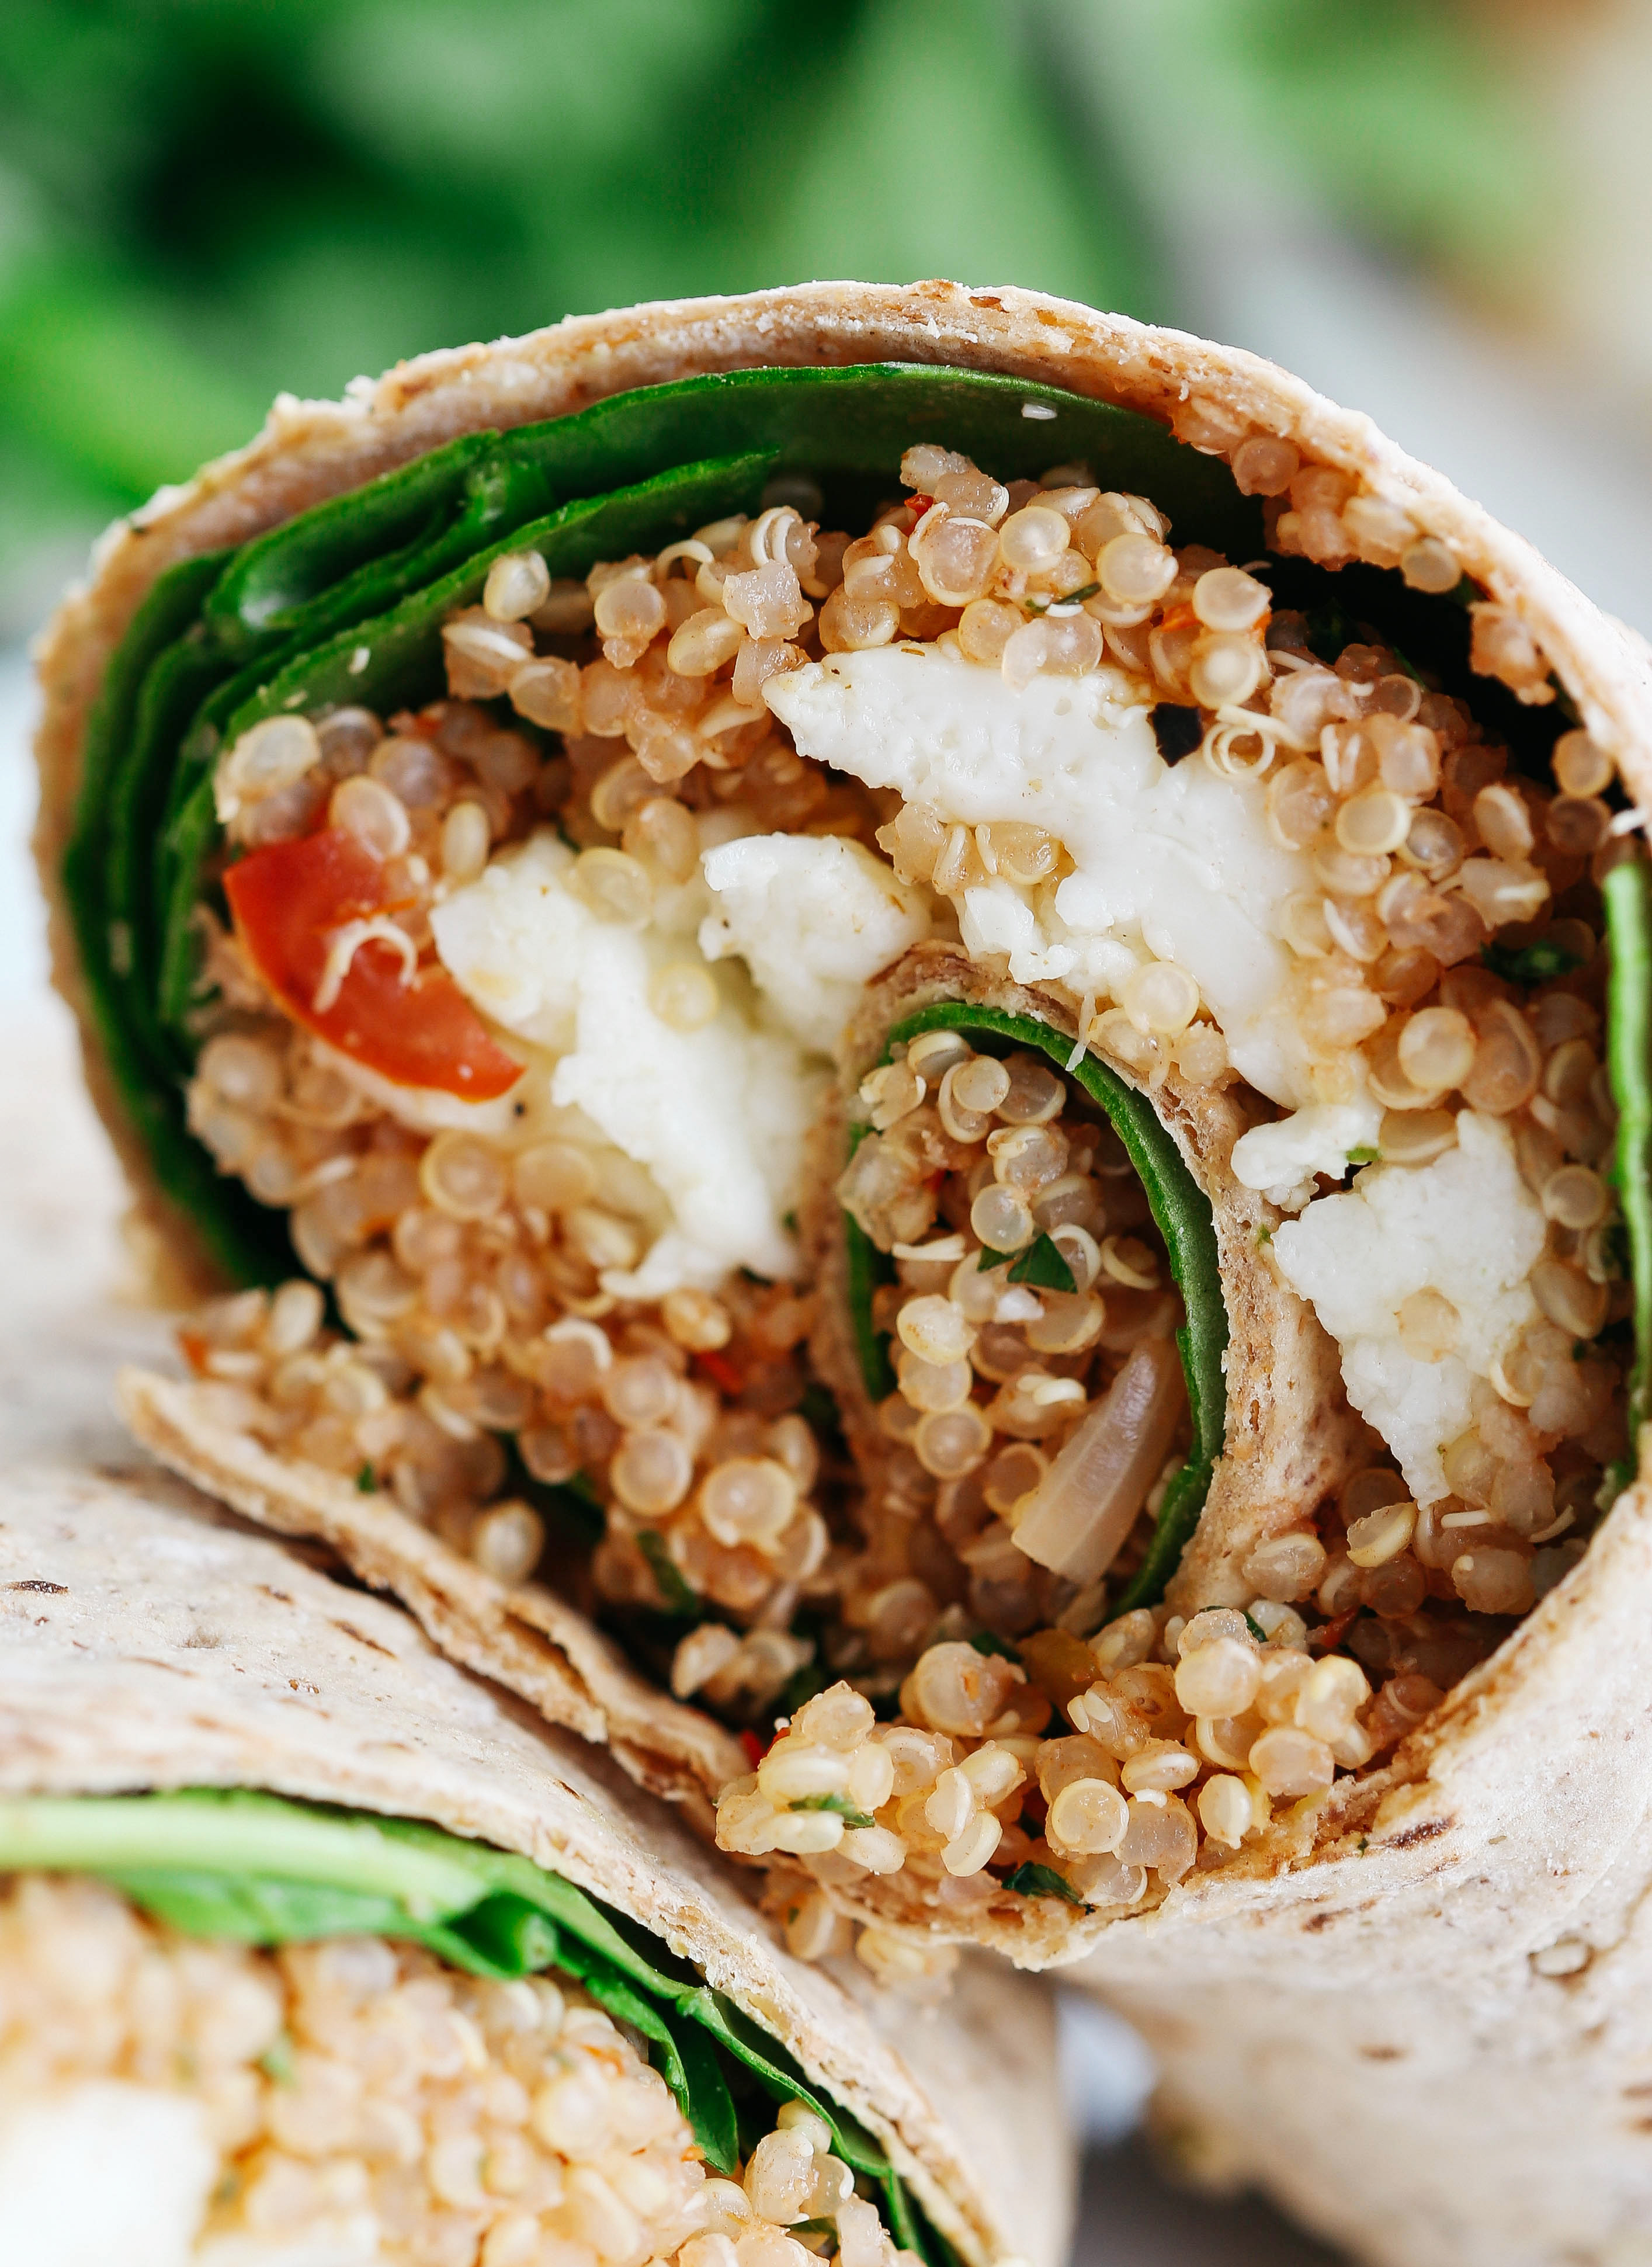 These Quinoa Egg White Wraps are super easy to make, are packed with tons of protein and taste super flavorful! They're also perfect to grab on-the-go!